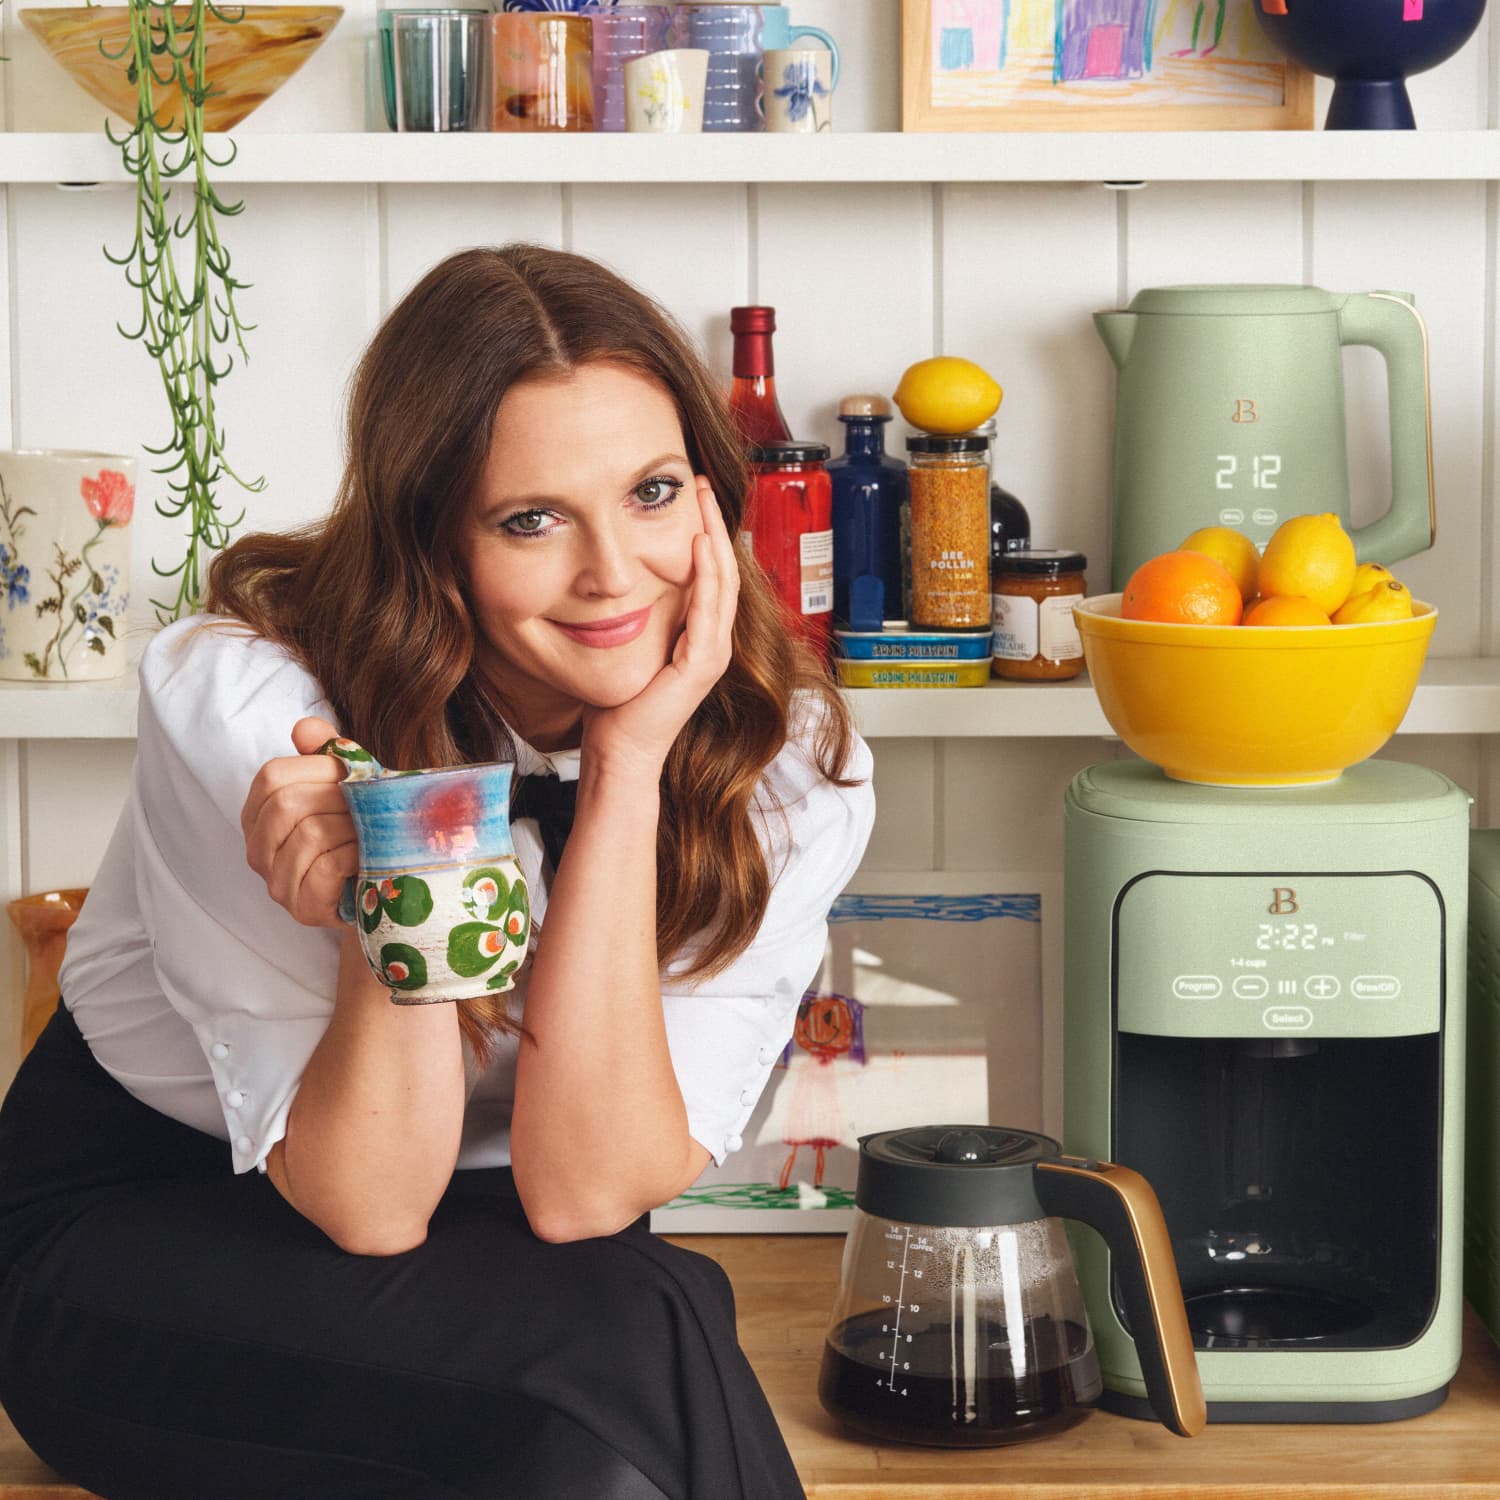 https://cdn.apartmenttherapy.info/image/upload/f_jpg,q_auto:eco,c_fill,g_auto,w_1500,ar_1:1/at%2Fnews-culture%2F2021-03%2FDrew_Barrymore_Small_Kitchen_Appliances_Lifestyle_Image